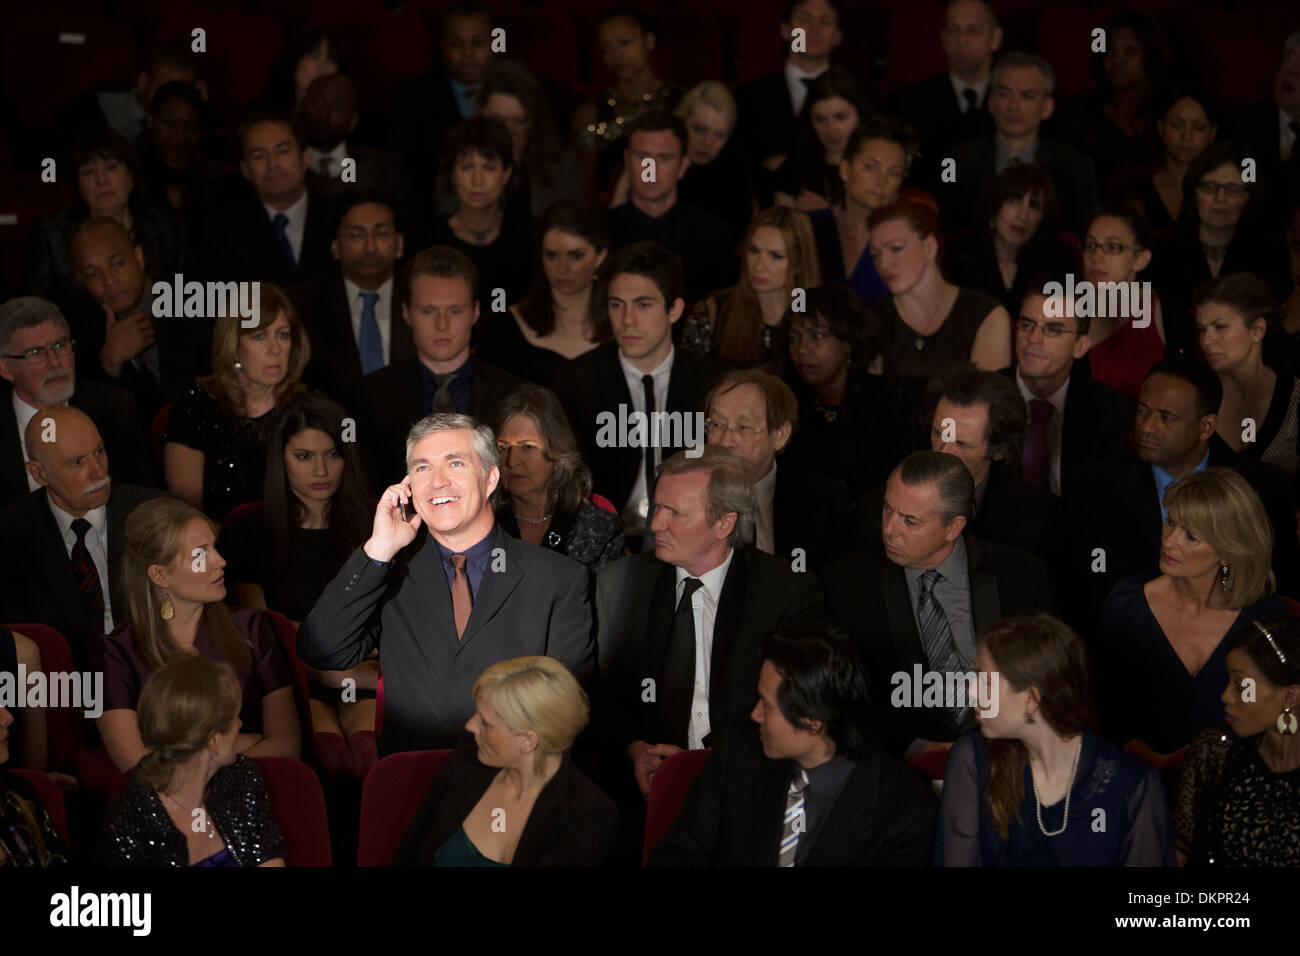 Man talking on cell phone in theater audience Stock Photo